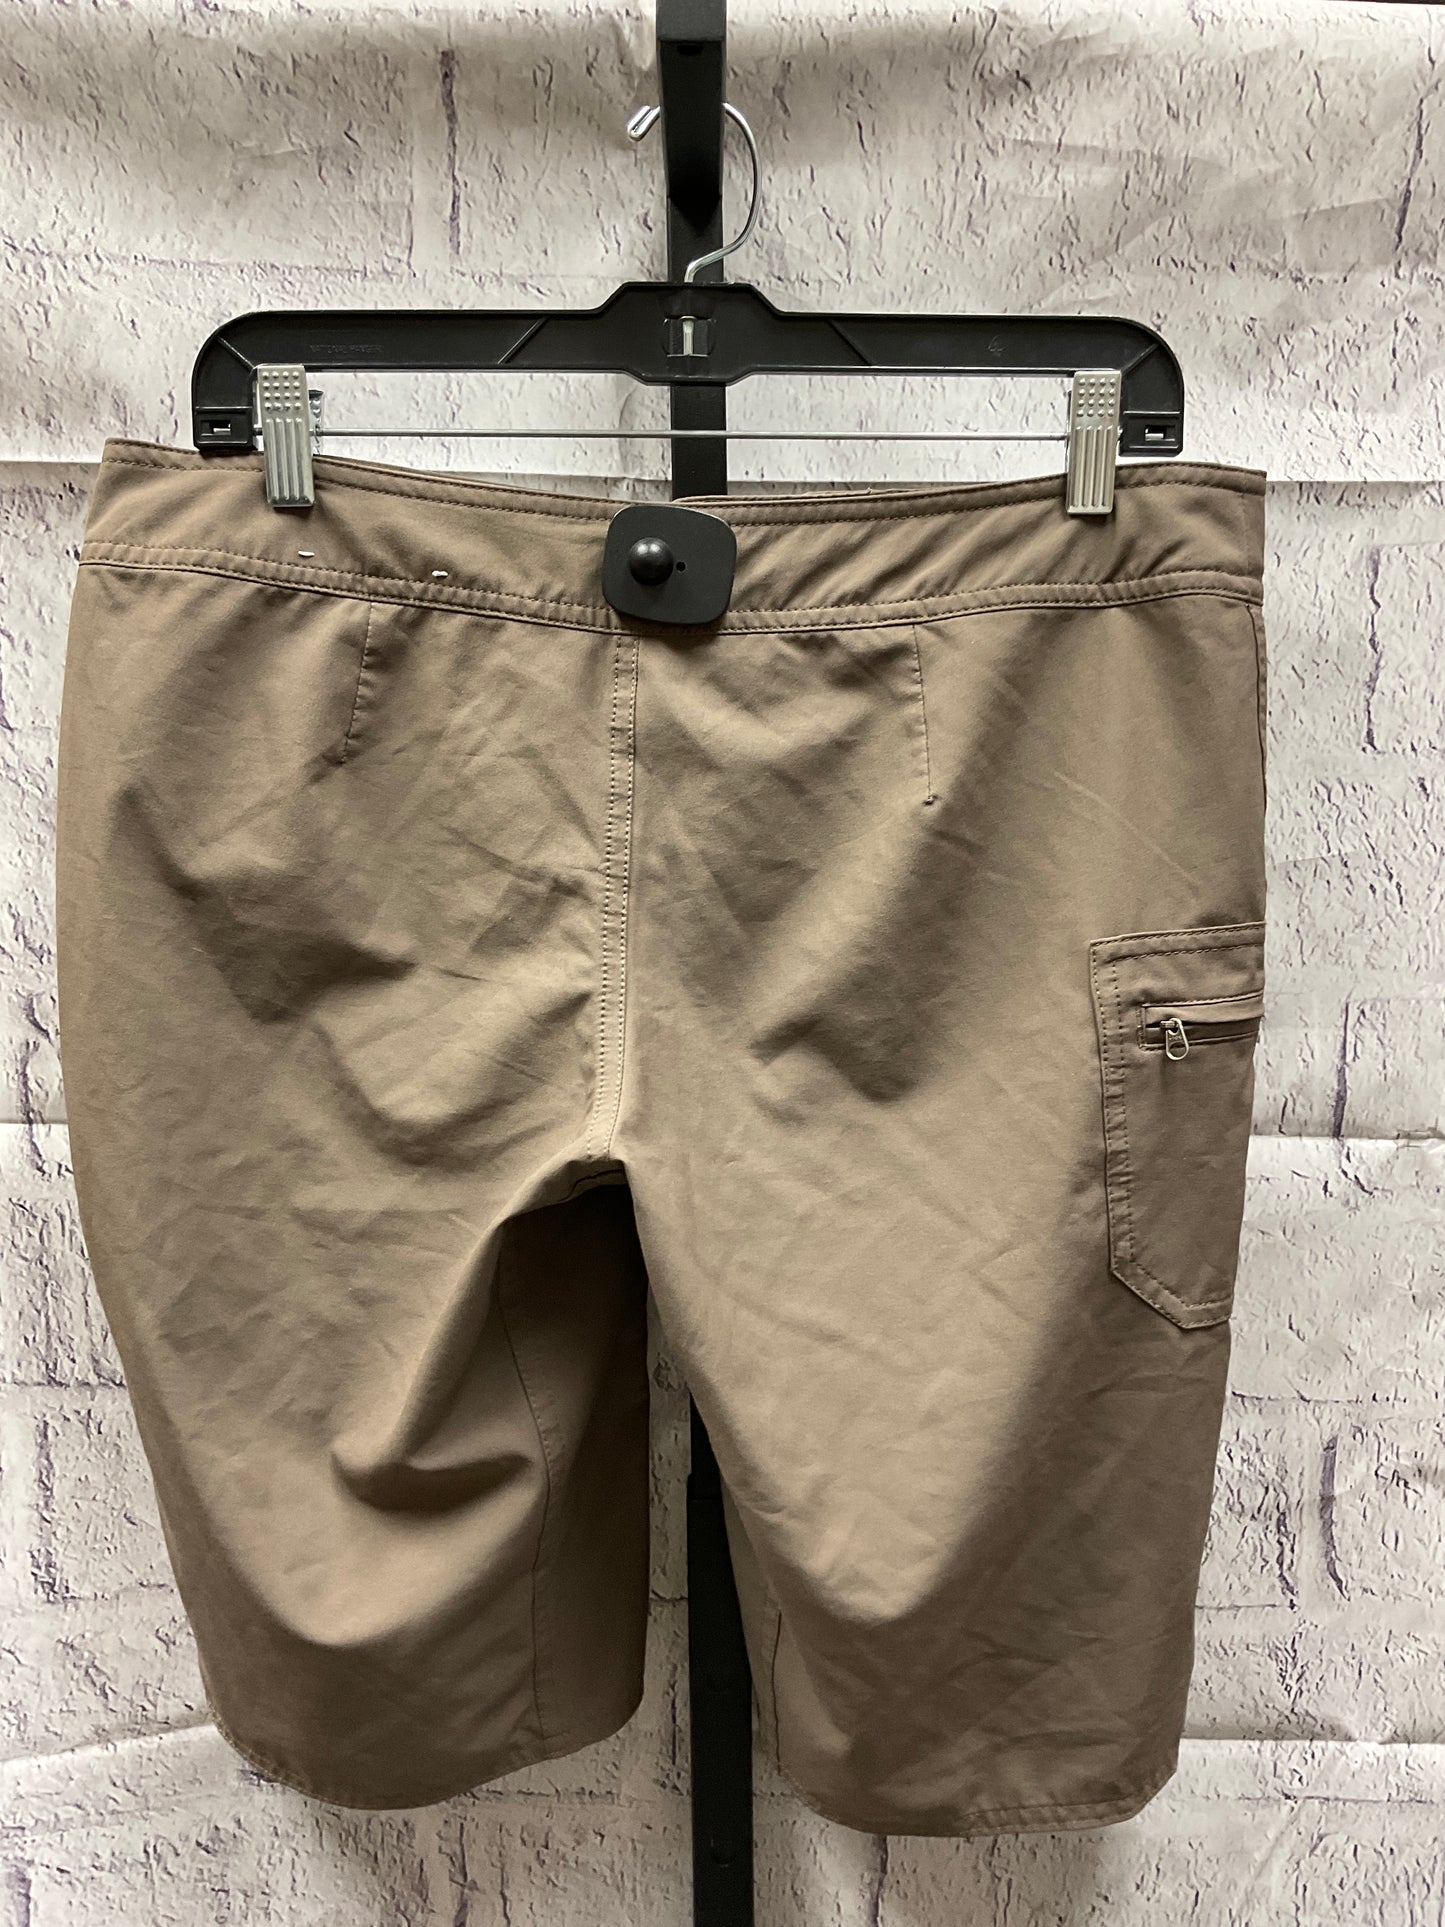 Athletic Shorts By Patagonia  Size: 8